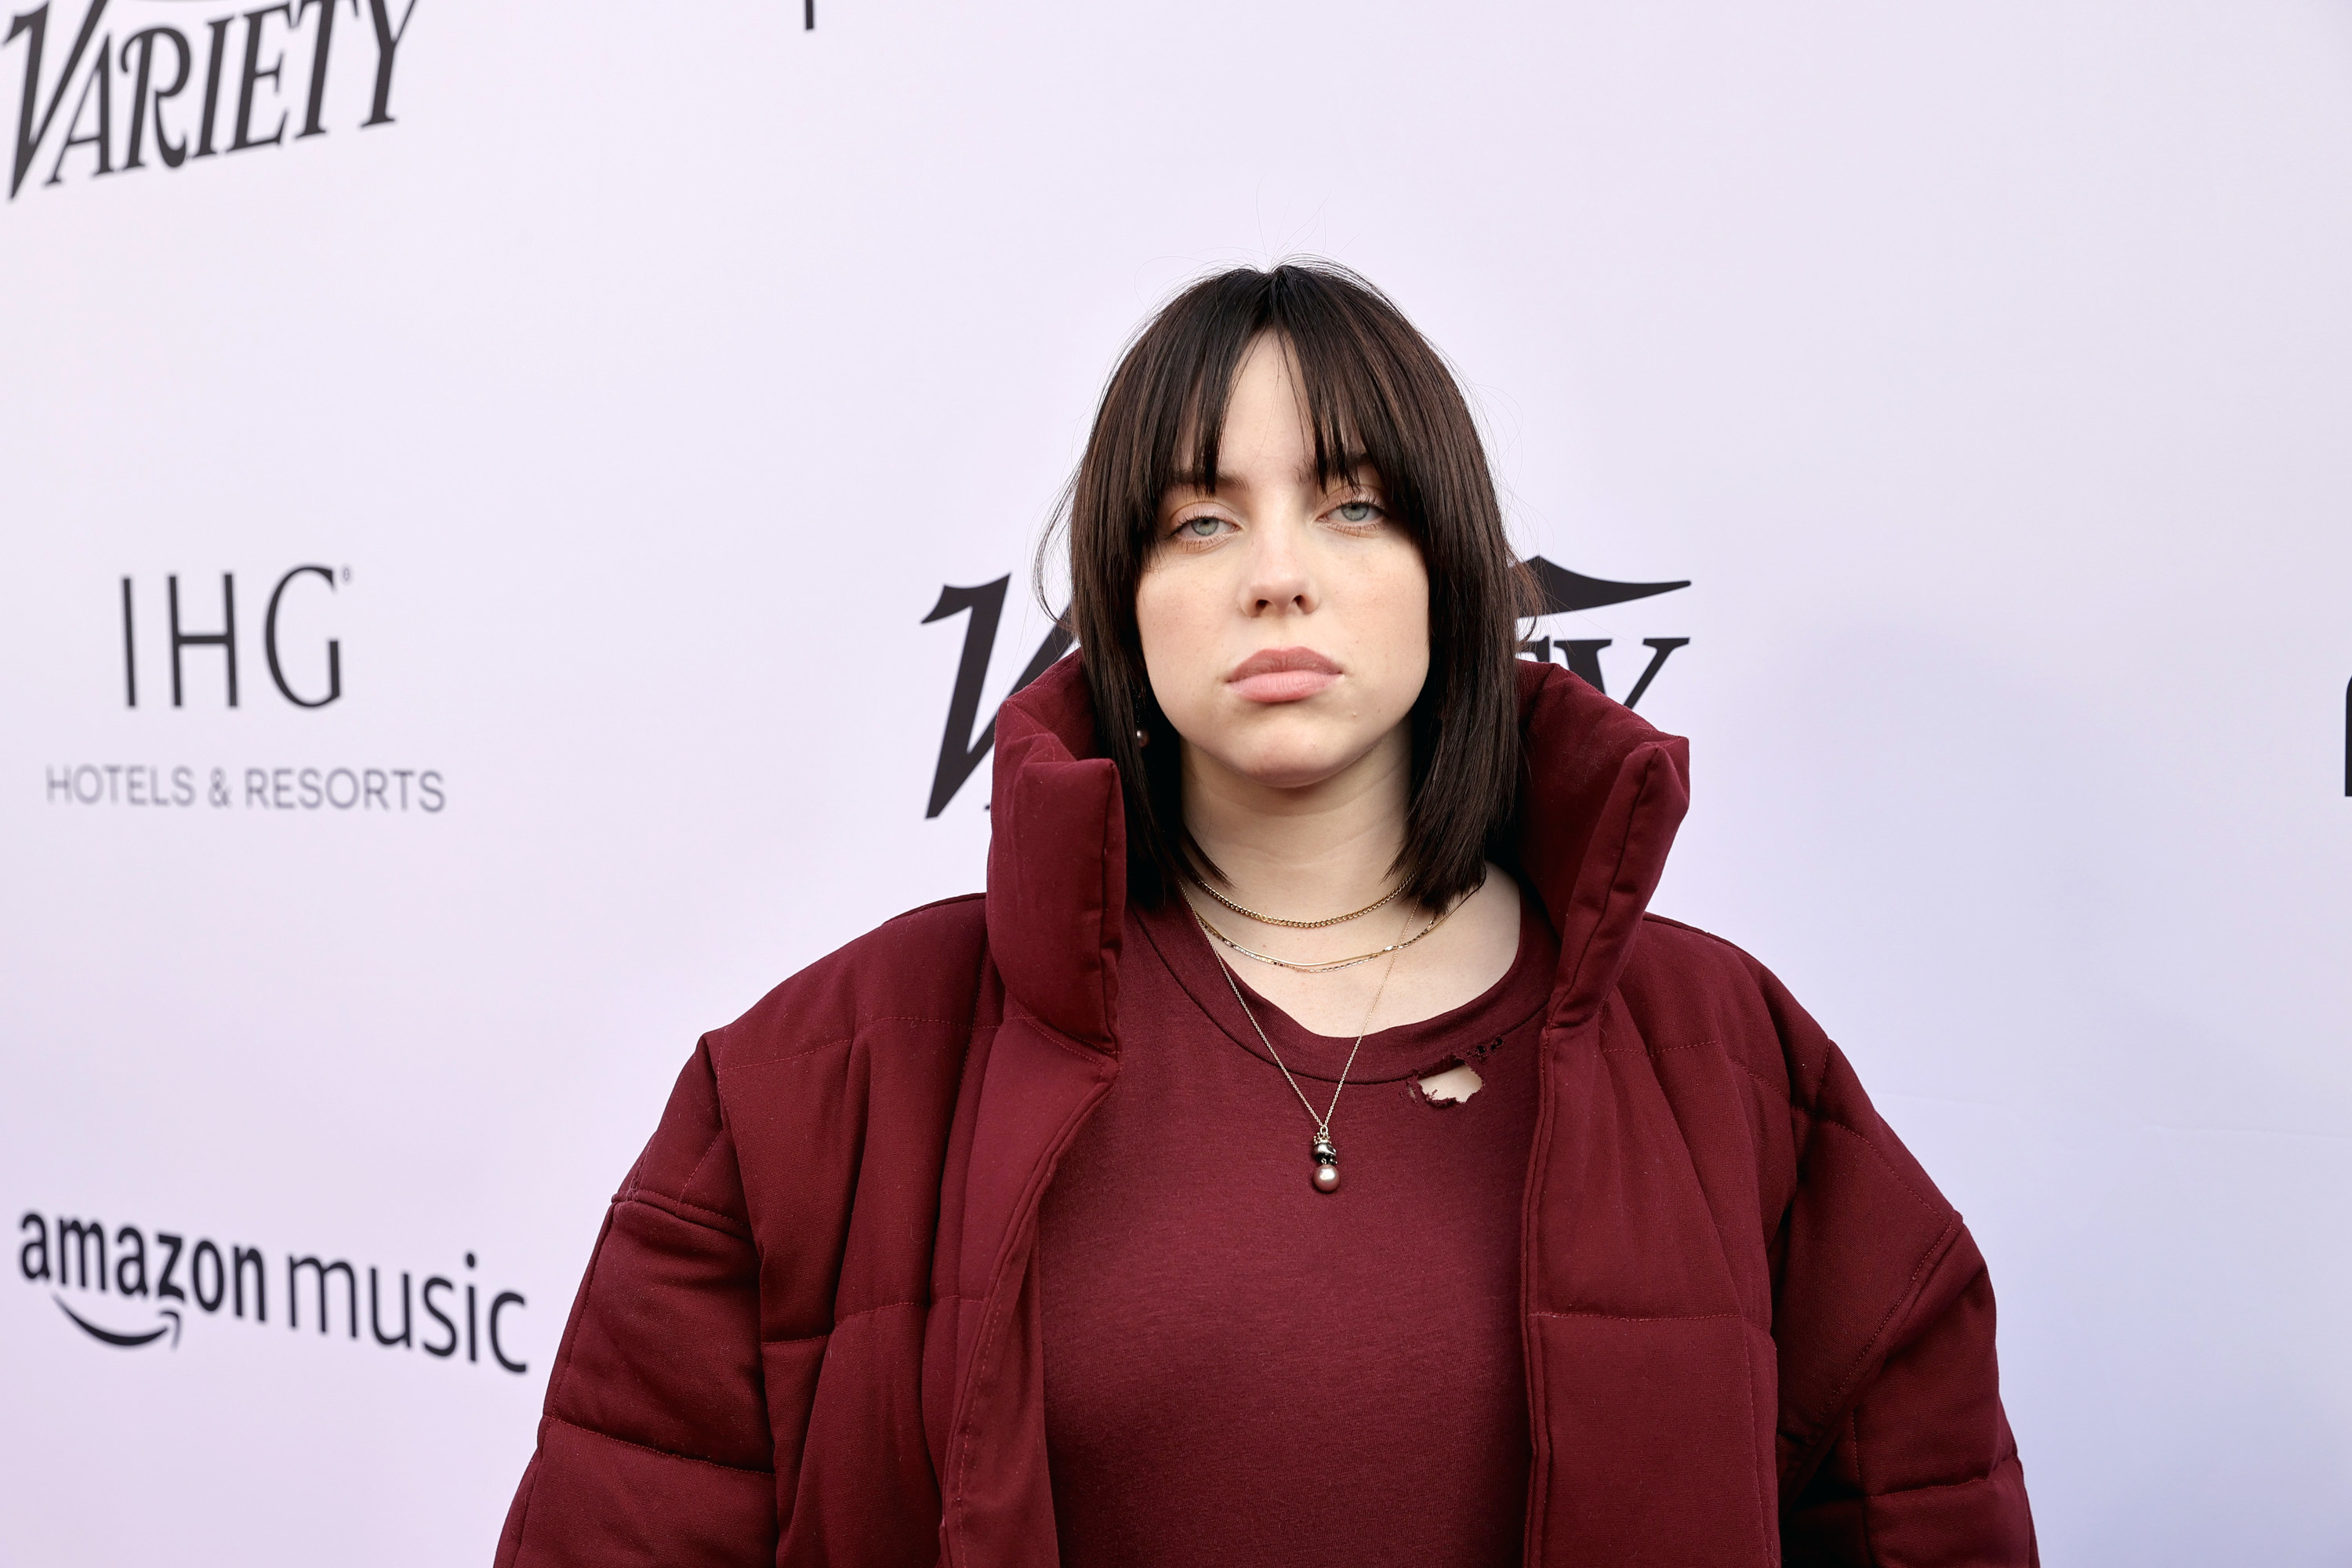 Another shot of brunette Billie on the red carpet